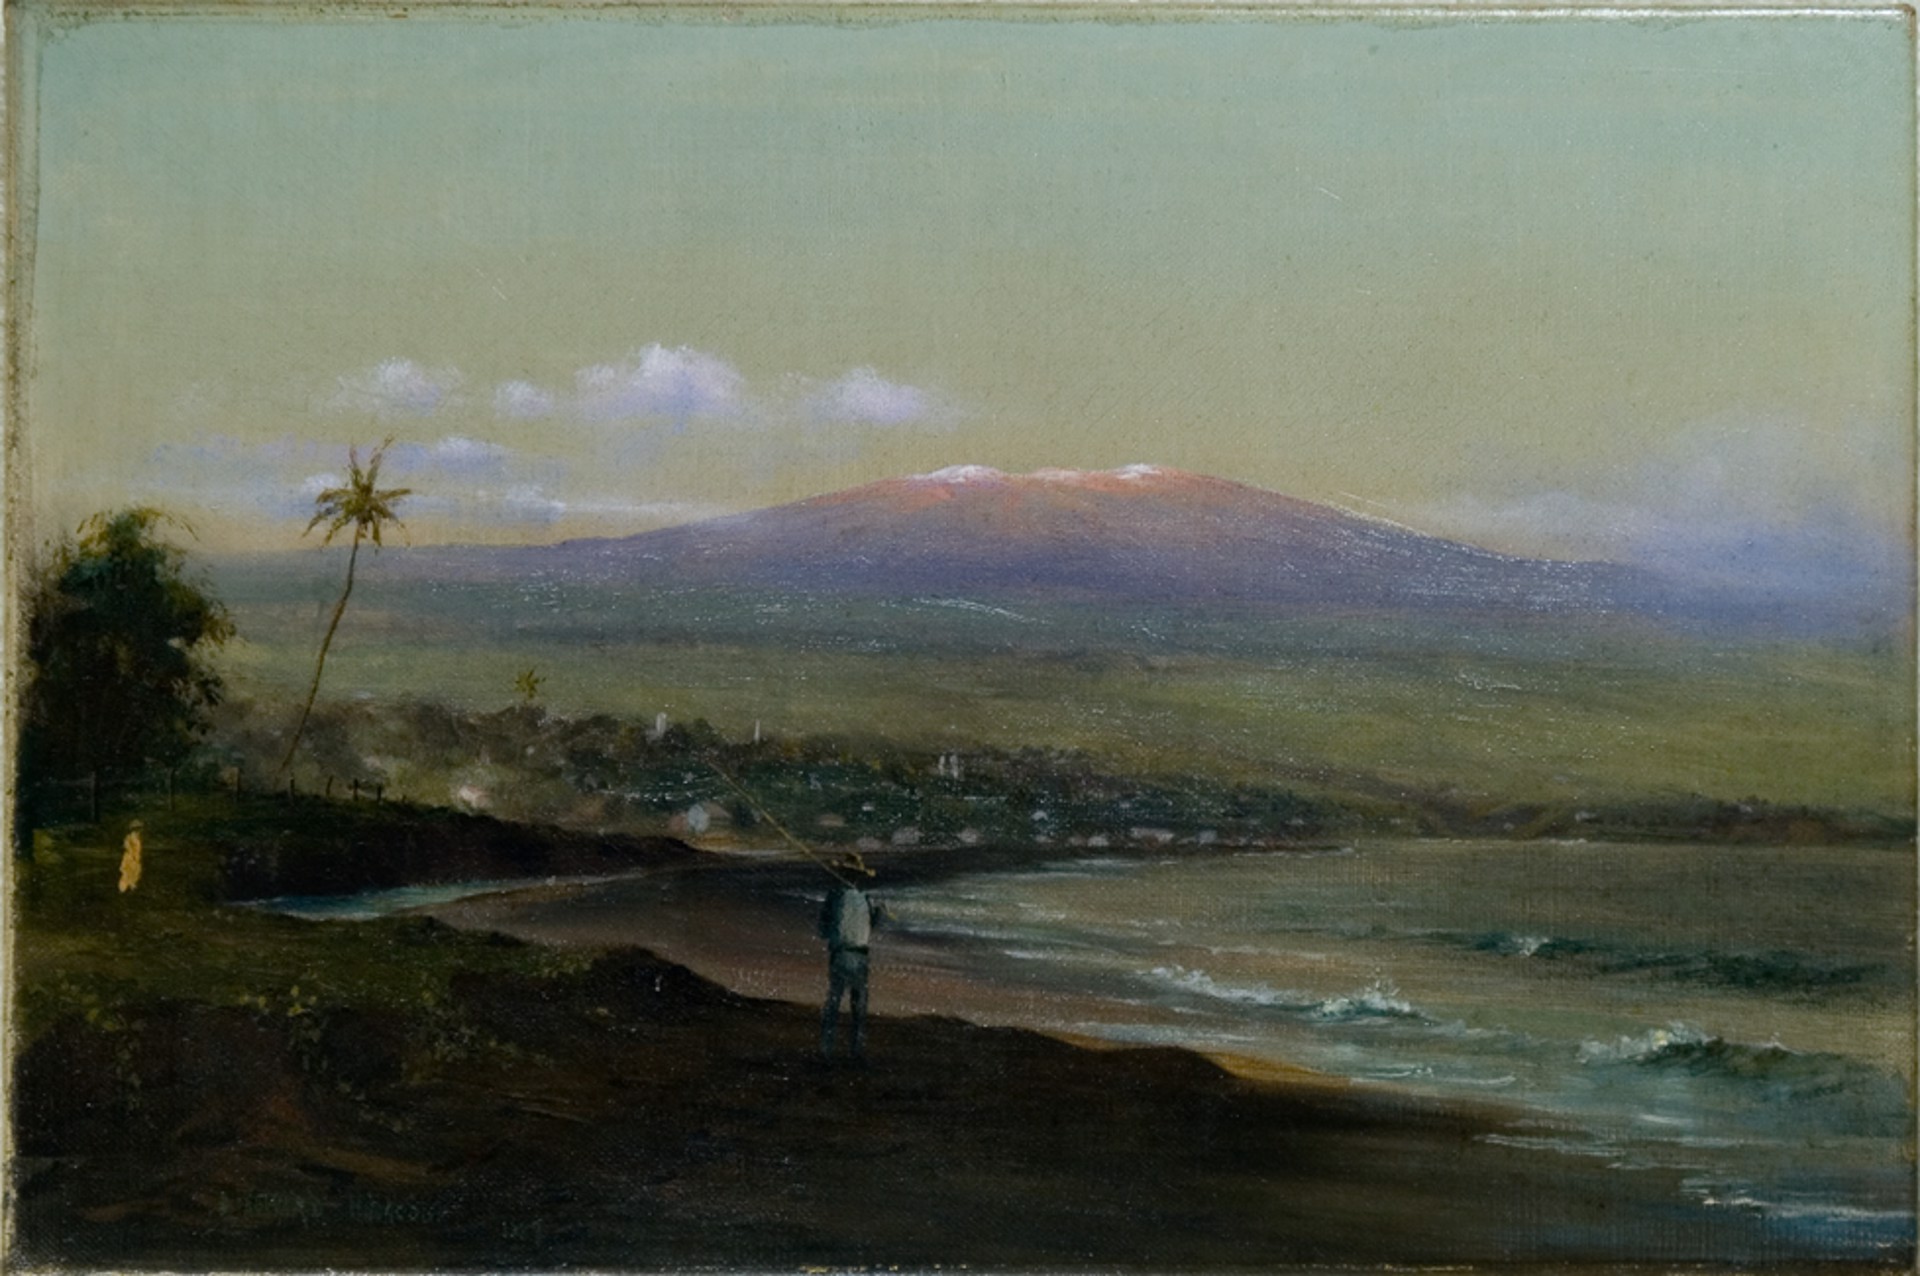 View of Snowcapped Mauna Kea from Hilo Bay by D. Howard Hitchcock